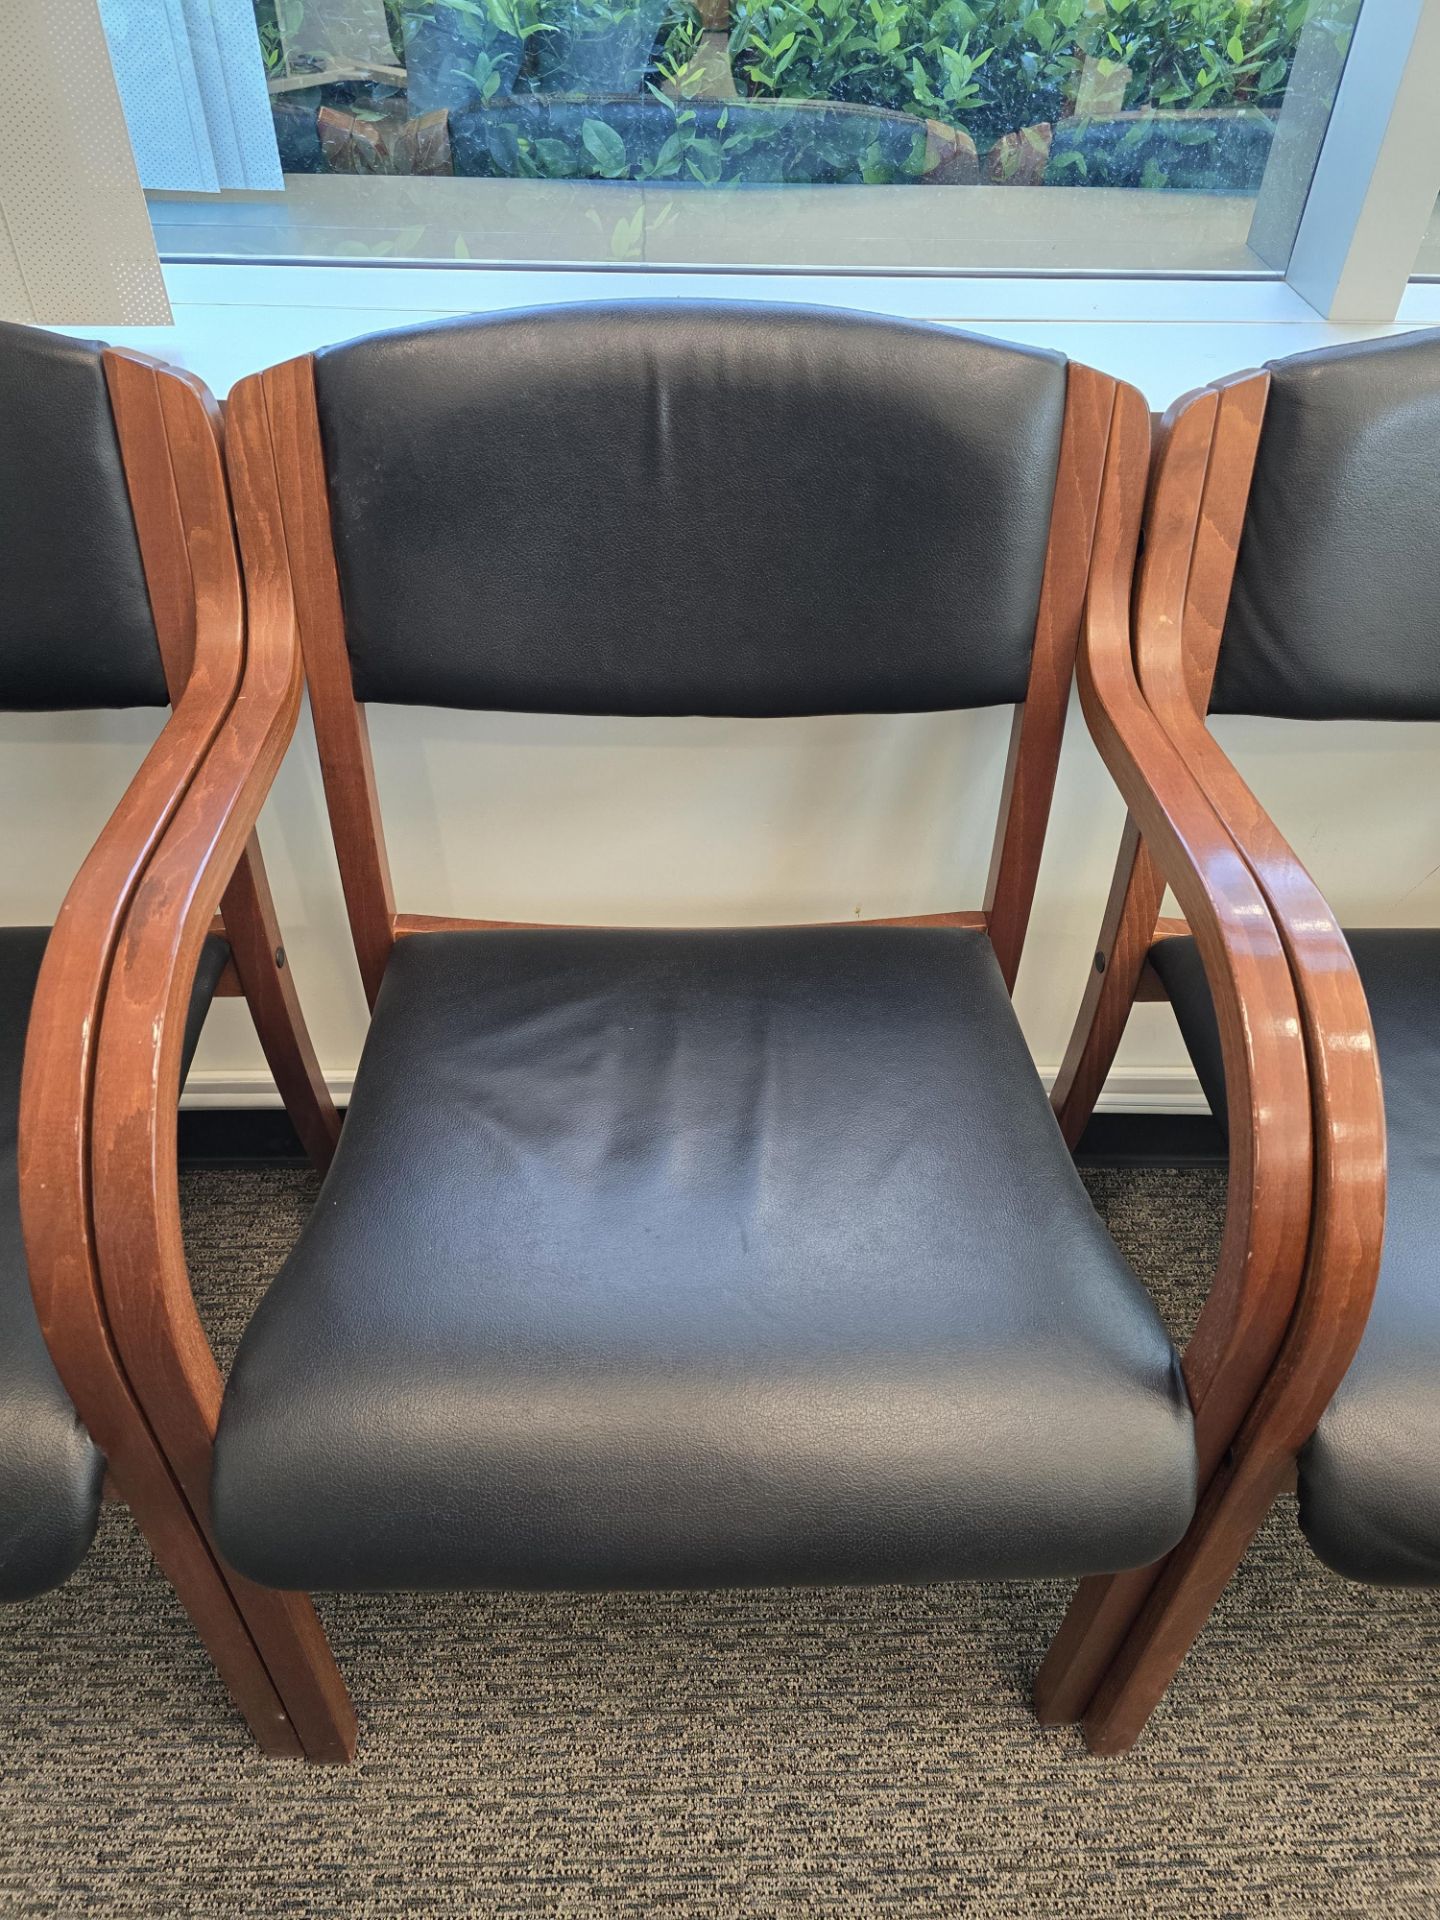 BLACK & BROWN CHAIRS - Image 2 of 2